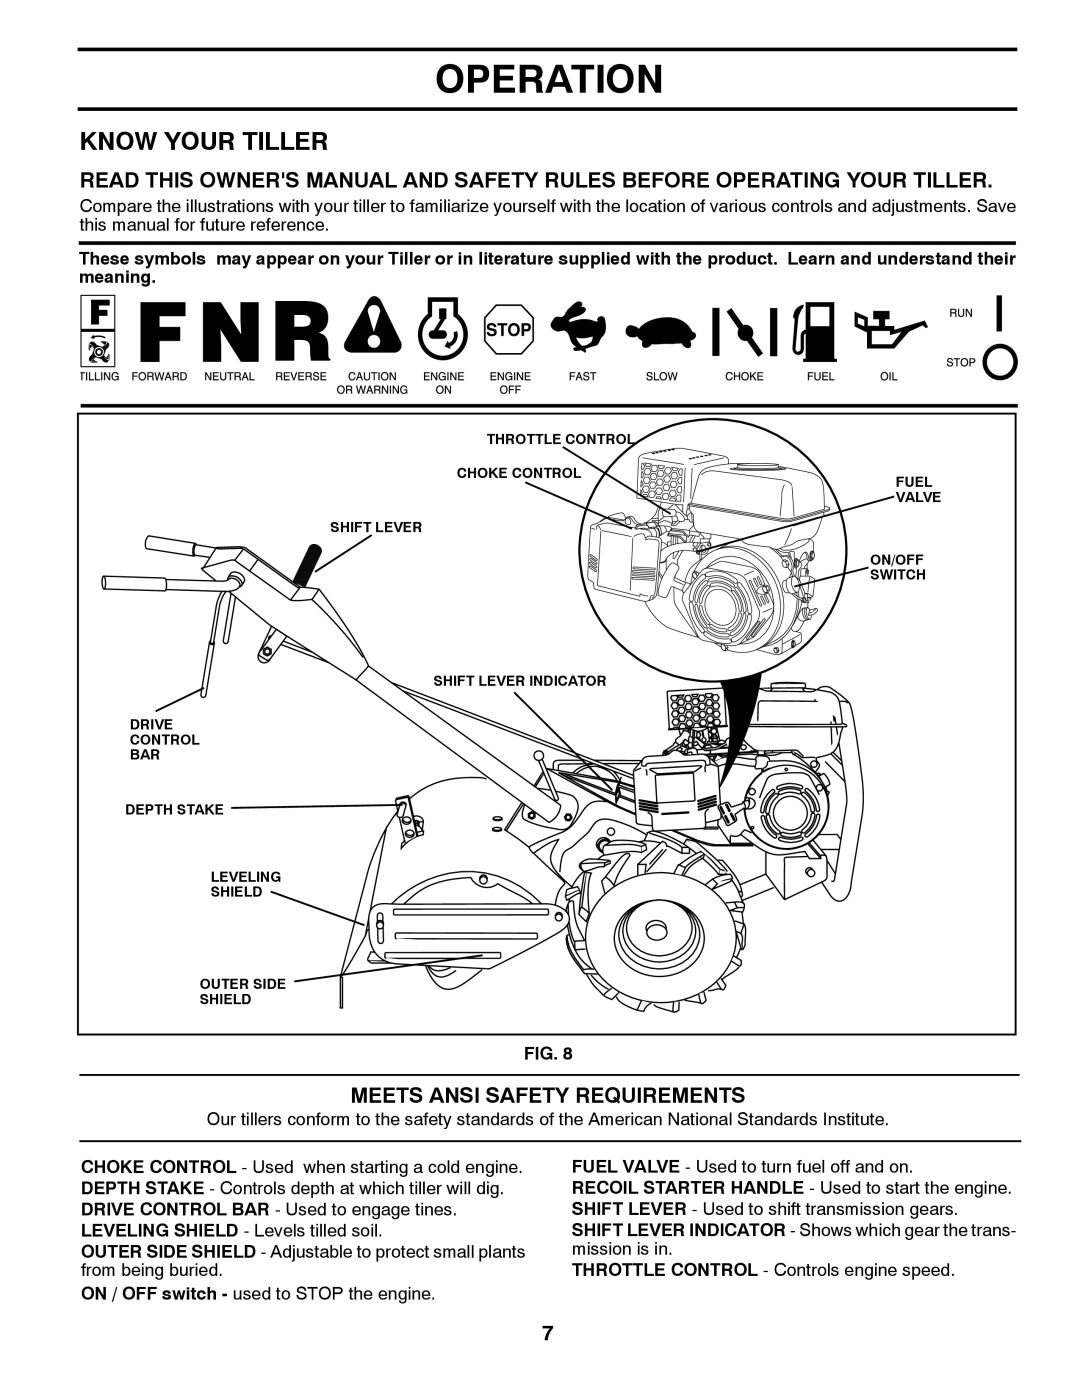 Poulan 423813 manual Operation, Know Your Tiller, Meets Ansi Safety Requirements, Fig 